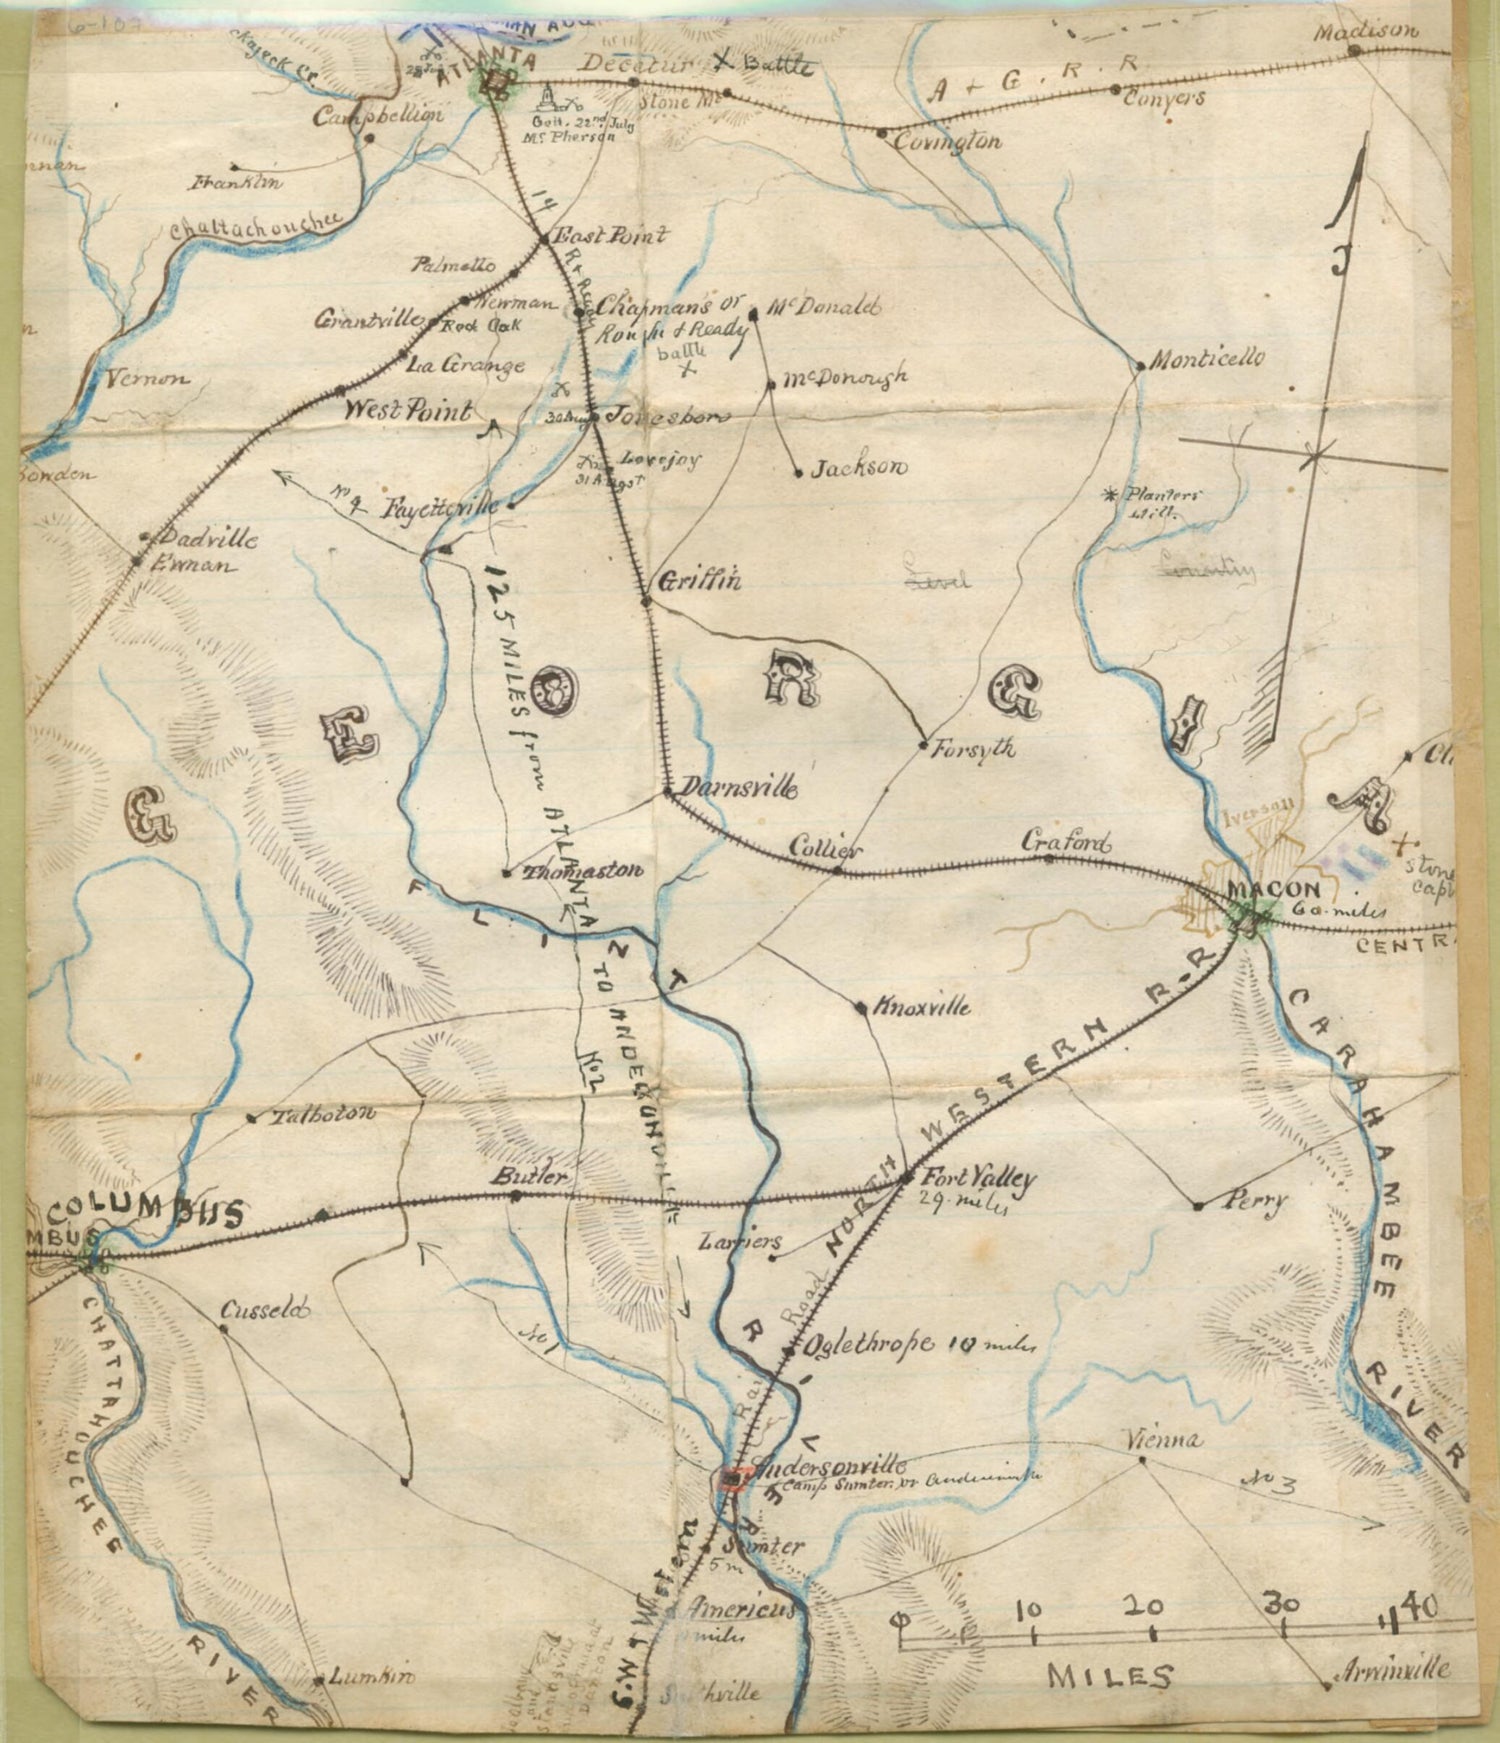 This old map of Georgia from 1861 was created by Robert Knox Sneden in 1861